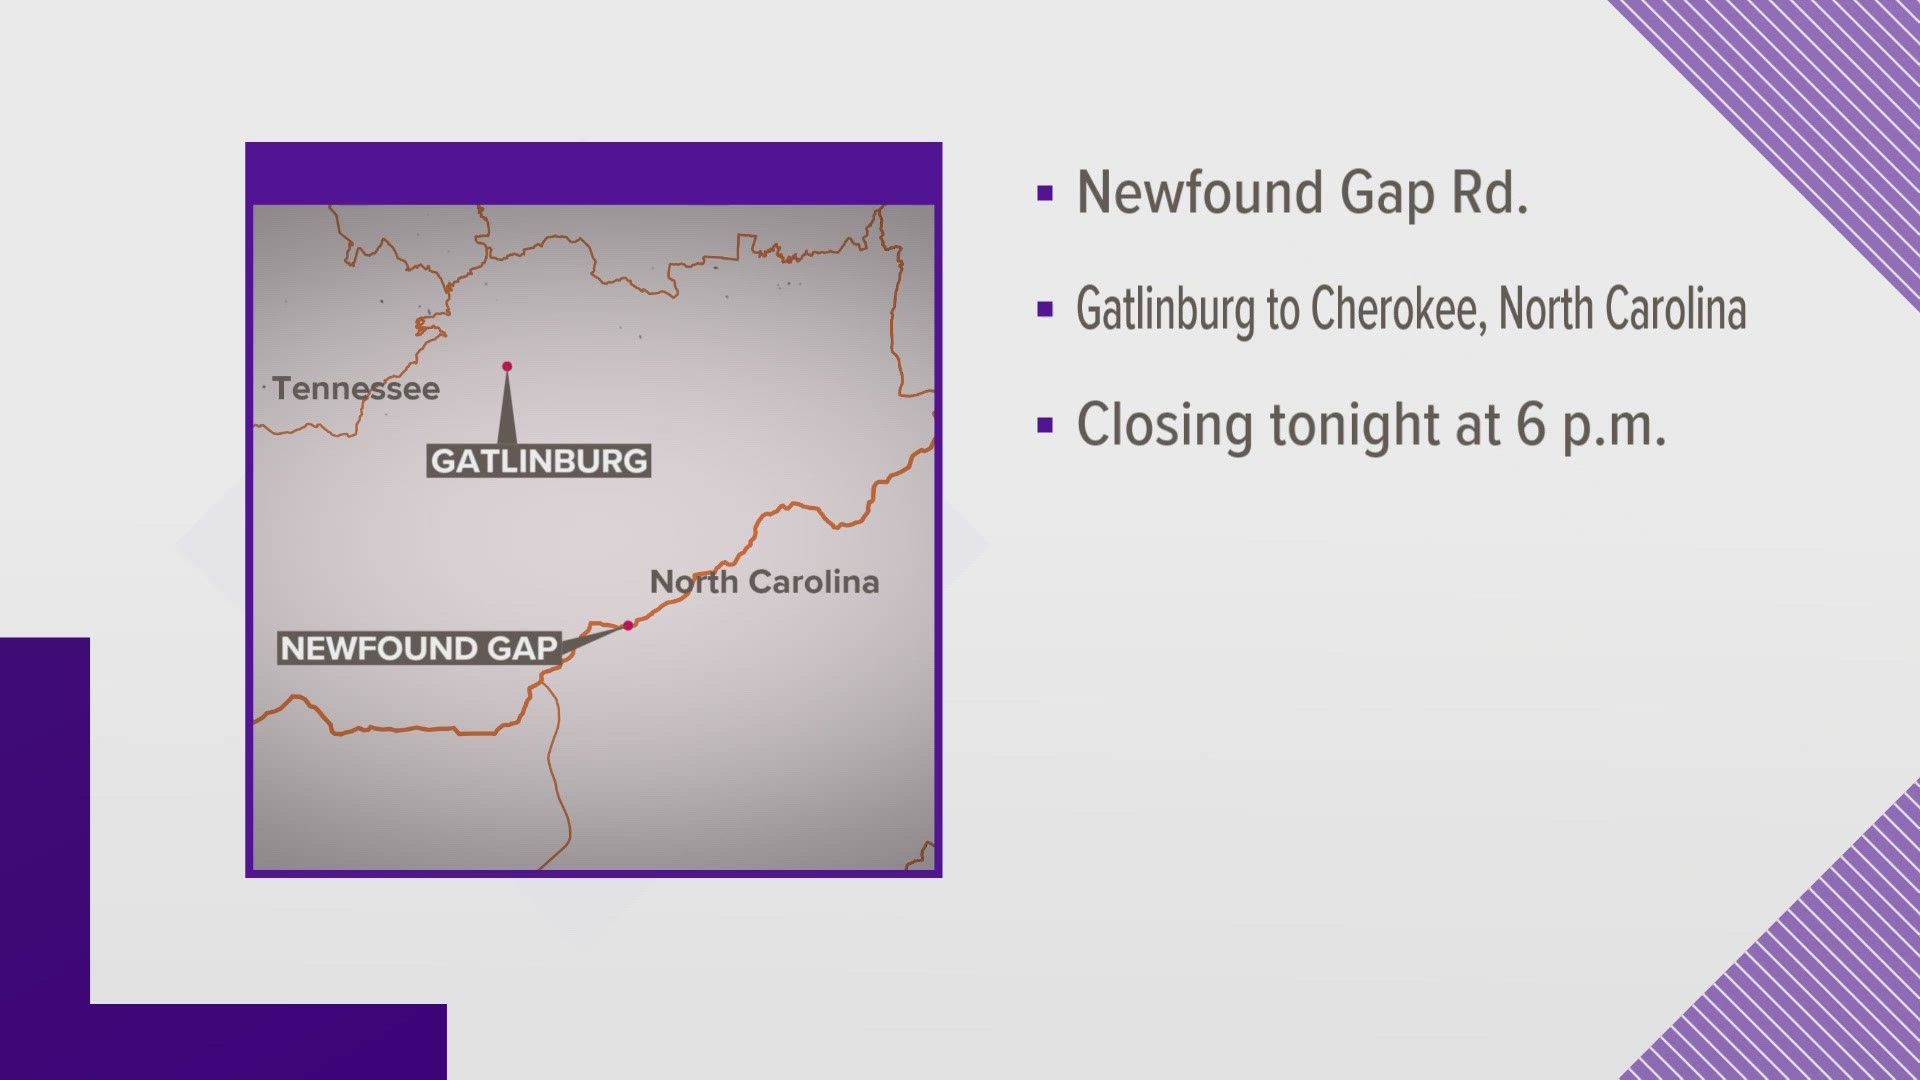 Newfound Gap Road from Gatlinburg to Cherokee, North Carolina will be closed temporarily due to high winds.